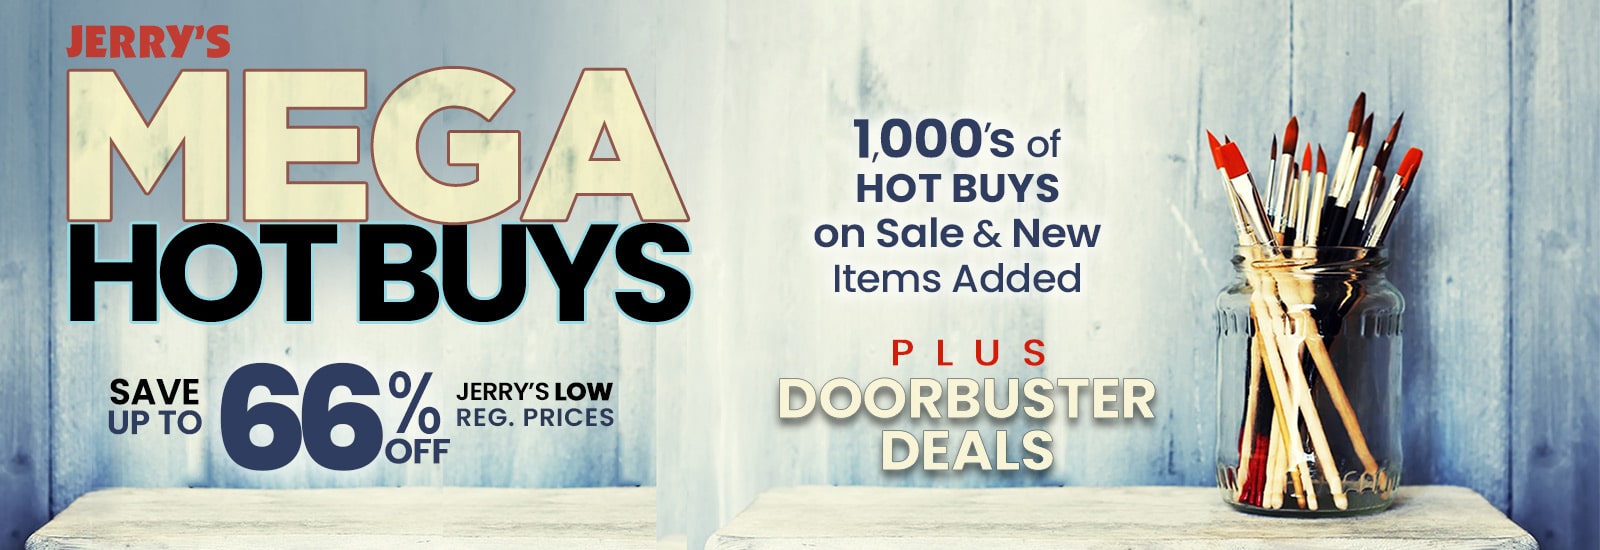 Real Savings MEGA Hot Buys - Save Up to 66% Off Jerry's Reg Prices